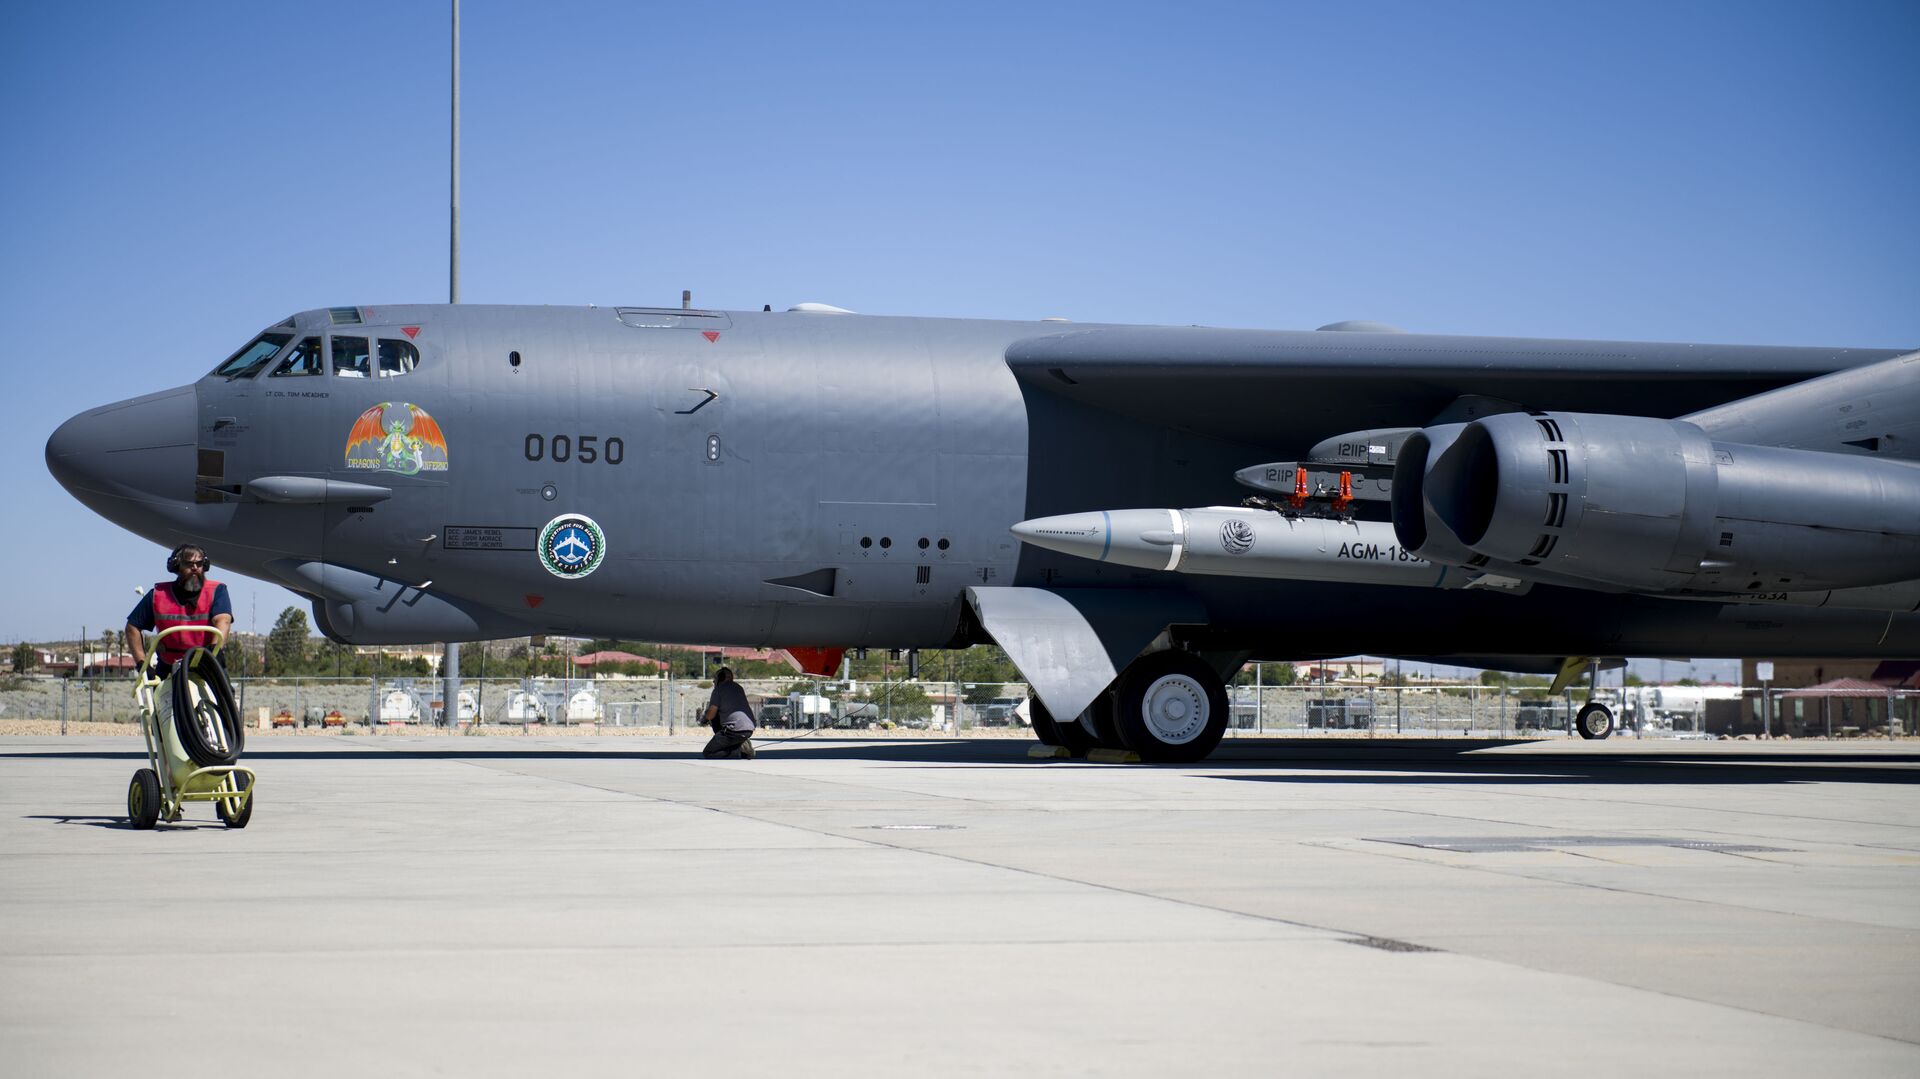 A B-52H Stratofortress assigned to the 419th Flight Test Squadron is undergoes pre-flight procedures at Edwards Air Force Base, California, Aug. 8. The aircraft conducted a captive-carry flight test of the AGM-183A Air-launched Rapid Response Weapon Instrumented Measurement Vehicle 2 at the Point Mugu Sea Range off the Southern California coast. - Sputnik International, 1920, 08.03.2022